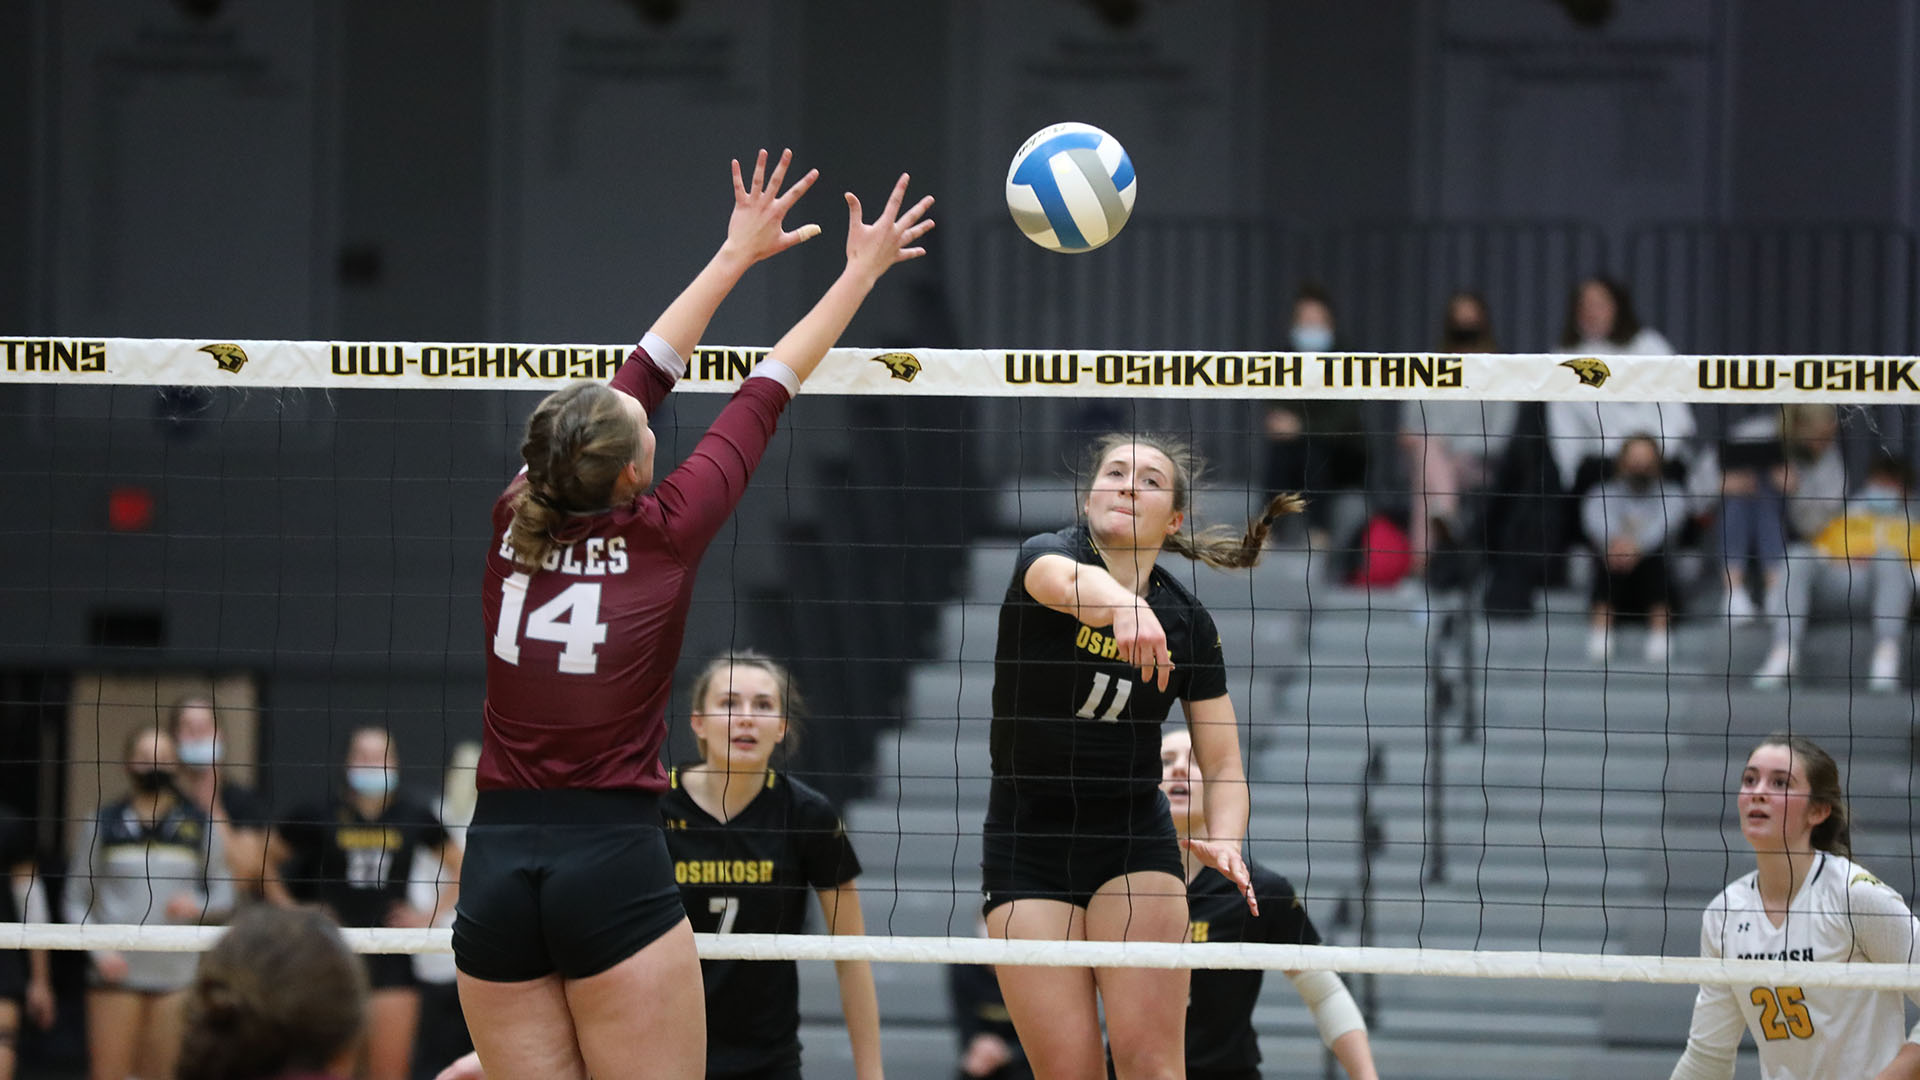 Riley Kindt had four kills on six errorless attempts in one set played against Hollins University.